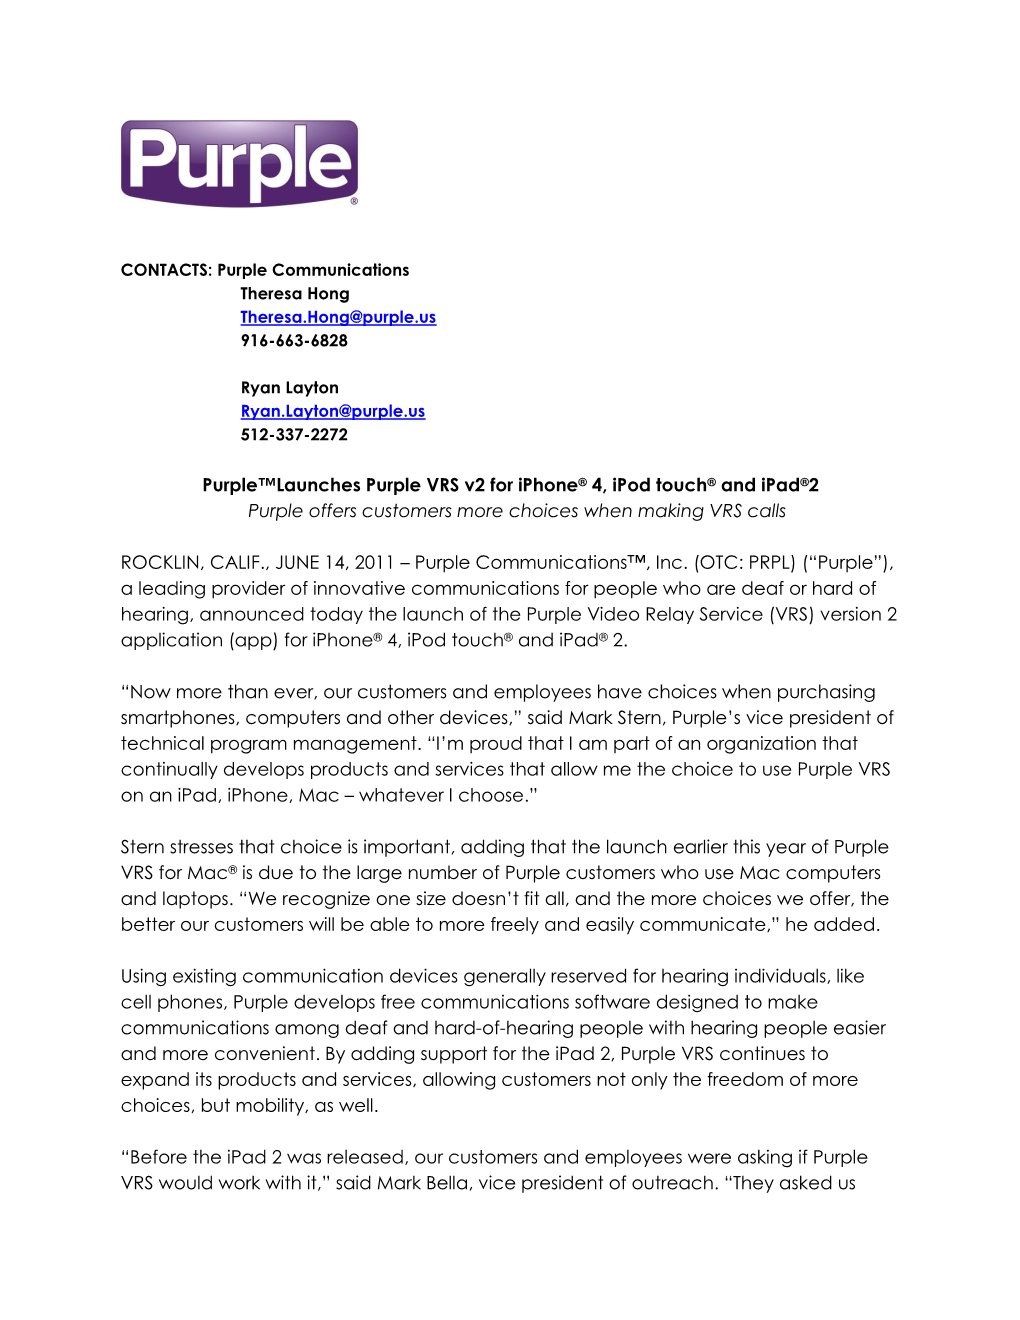 Purple™Launches Purple VRS V2 for Iphone® 4, Ipod Touch® and Ipad®2 Purple Offers Customers More Choices When Making VRS Calls